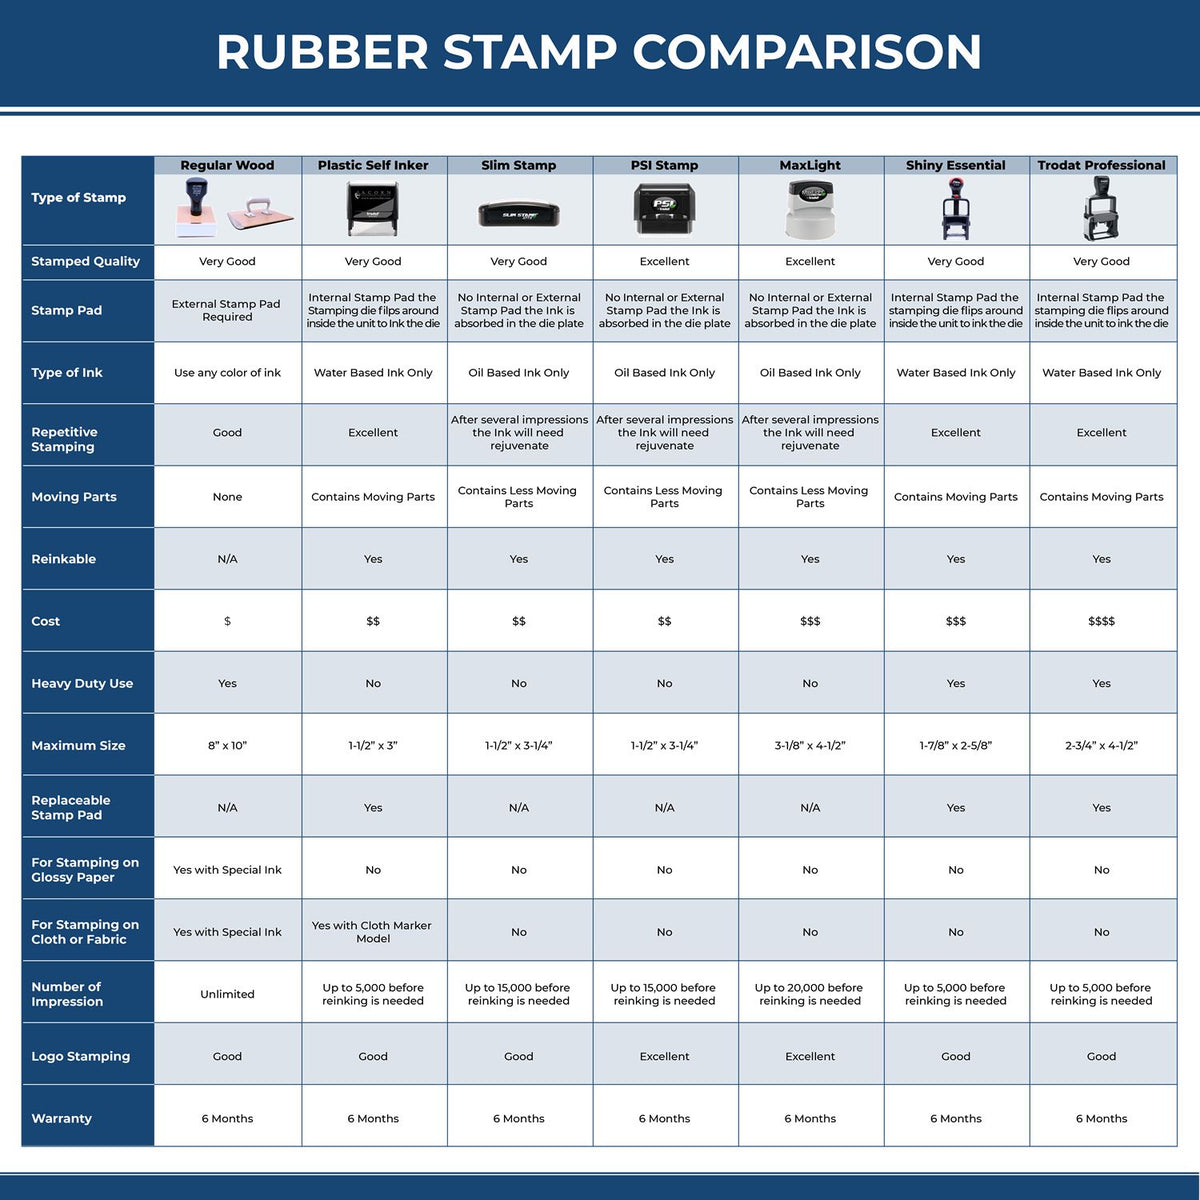 A comparison chart for the different types of mount models available for the Premium MaxLight Pre-Inked Rhode Island Engineering Stamp.